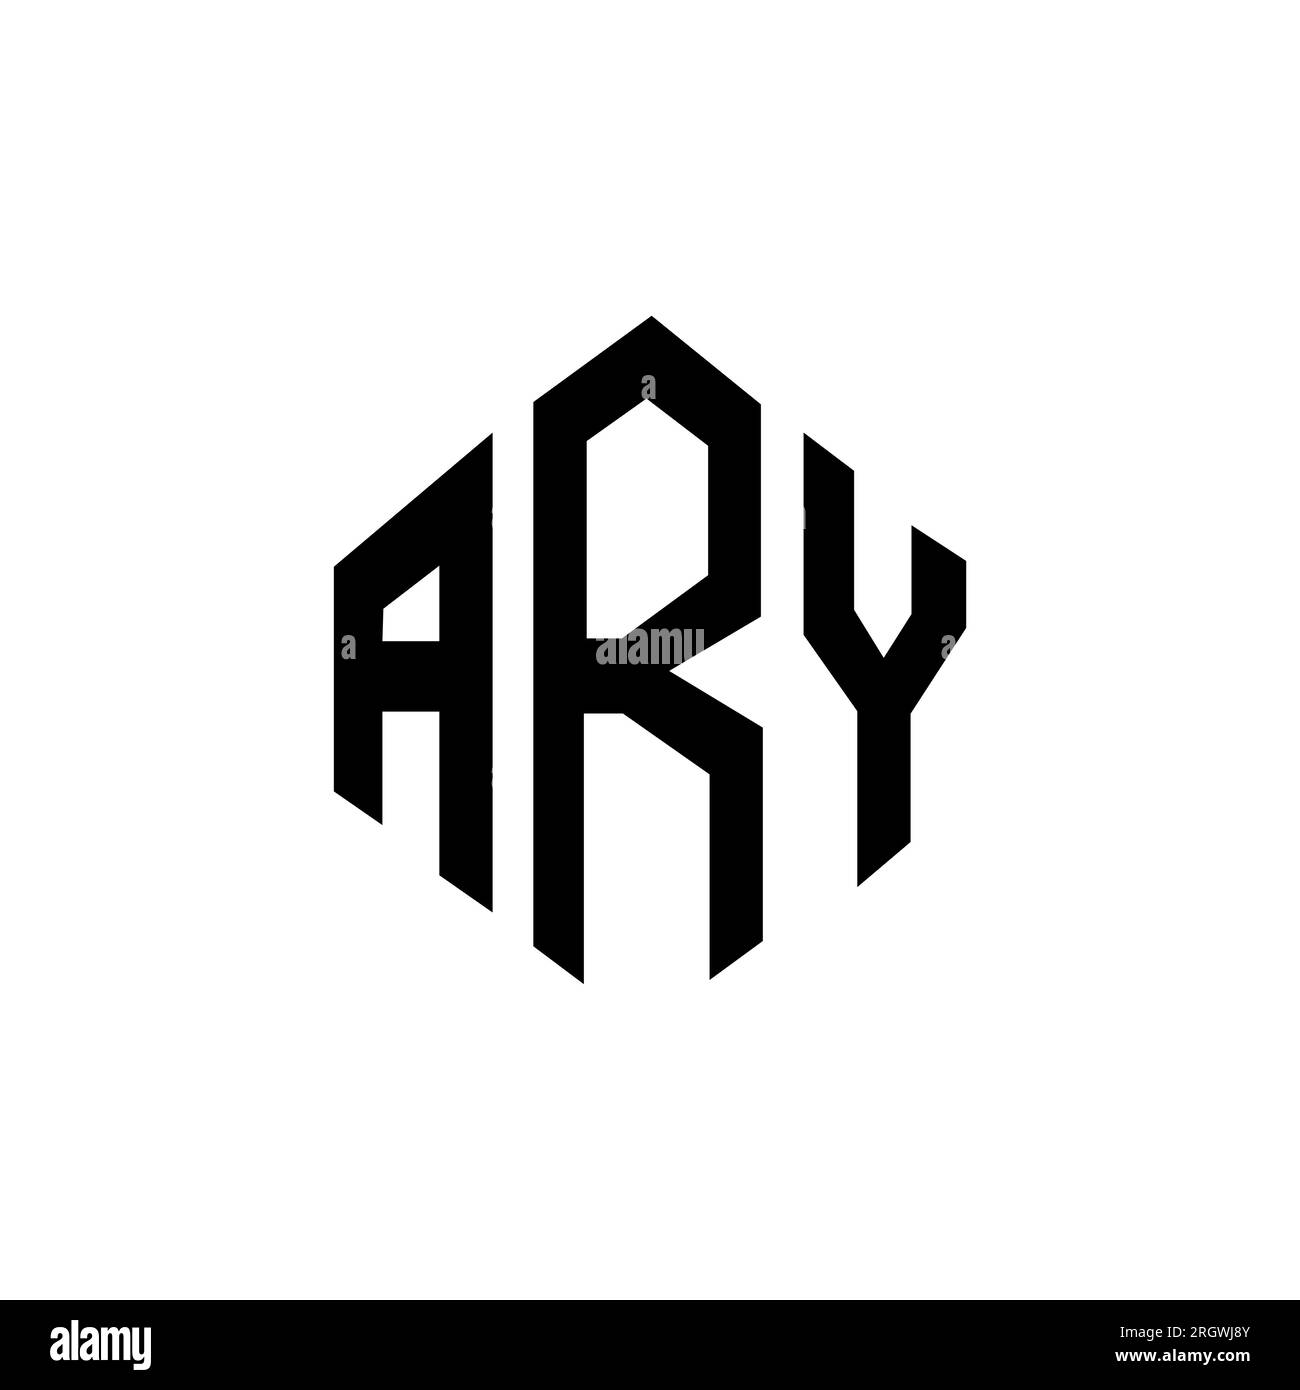 ARY letter logo design with polygon shape. ARY polygon and cube shape logo design. ARY hexagon vector logo template white and black colors. ARY monogr Stock Vector